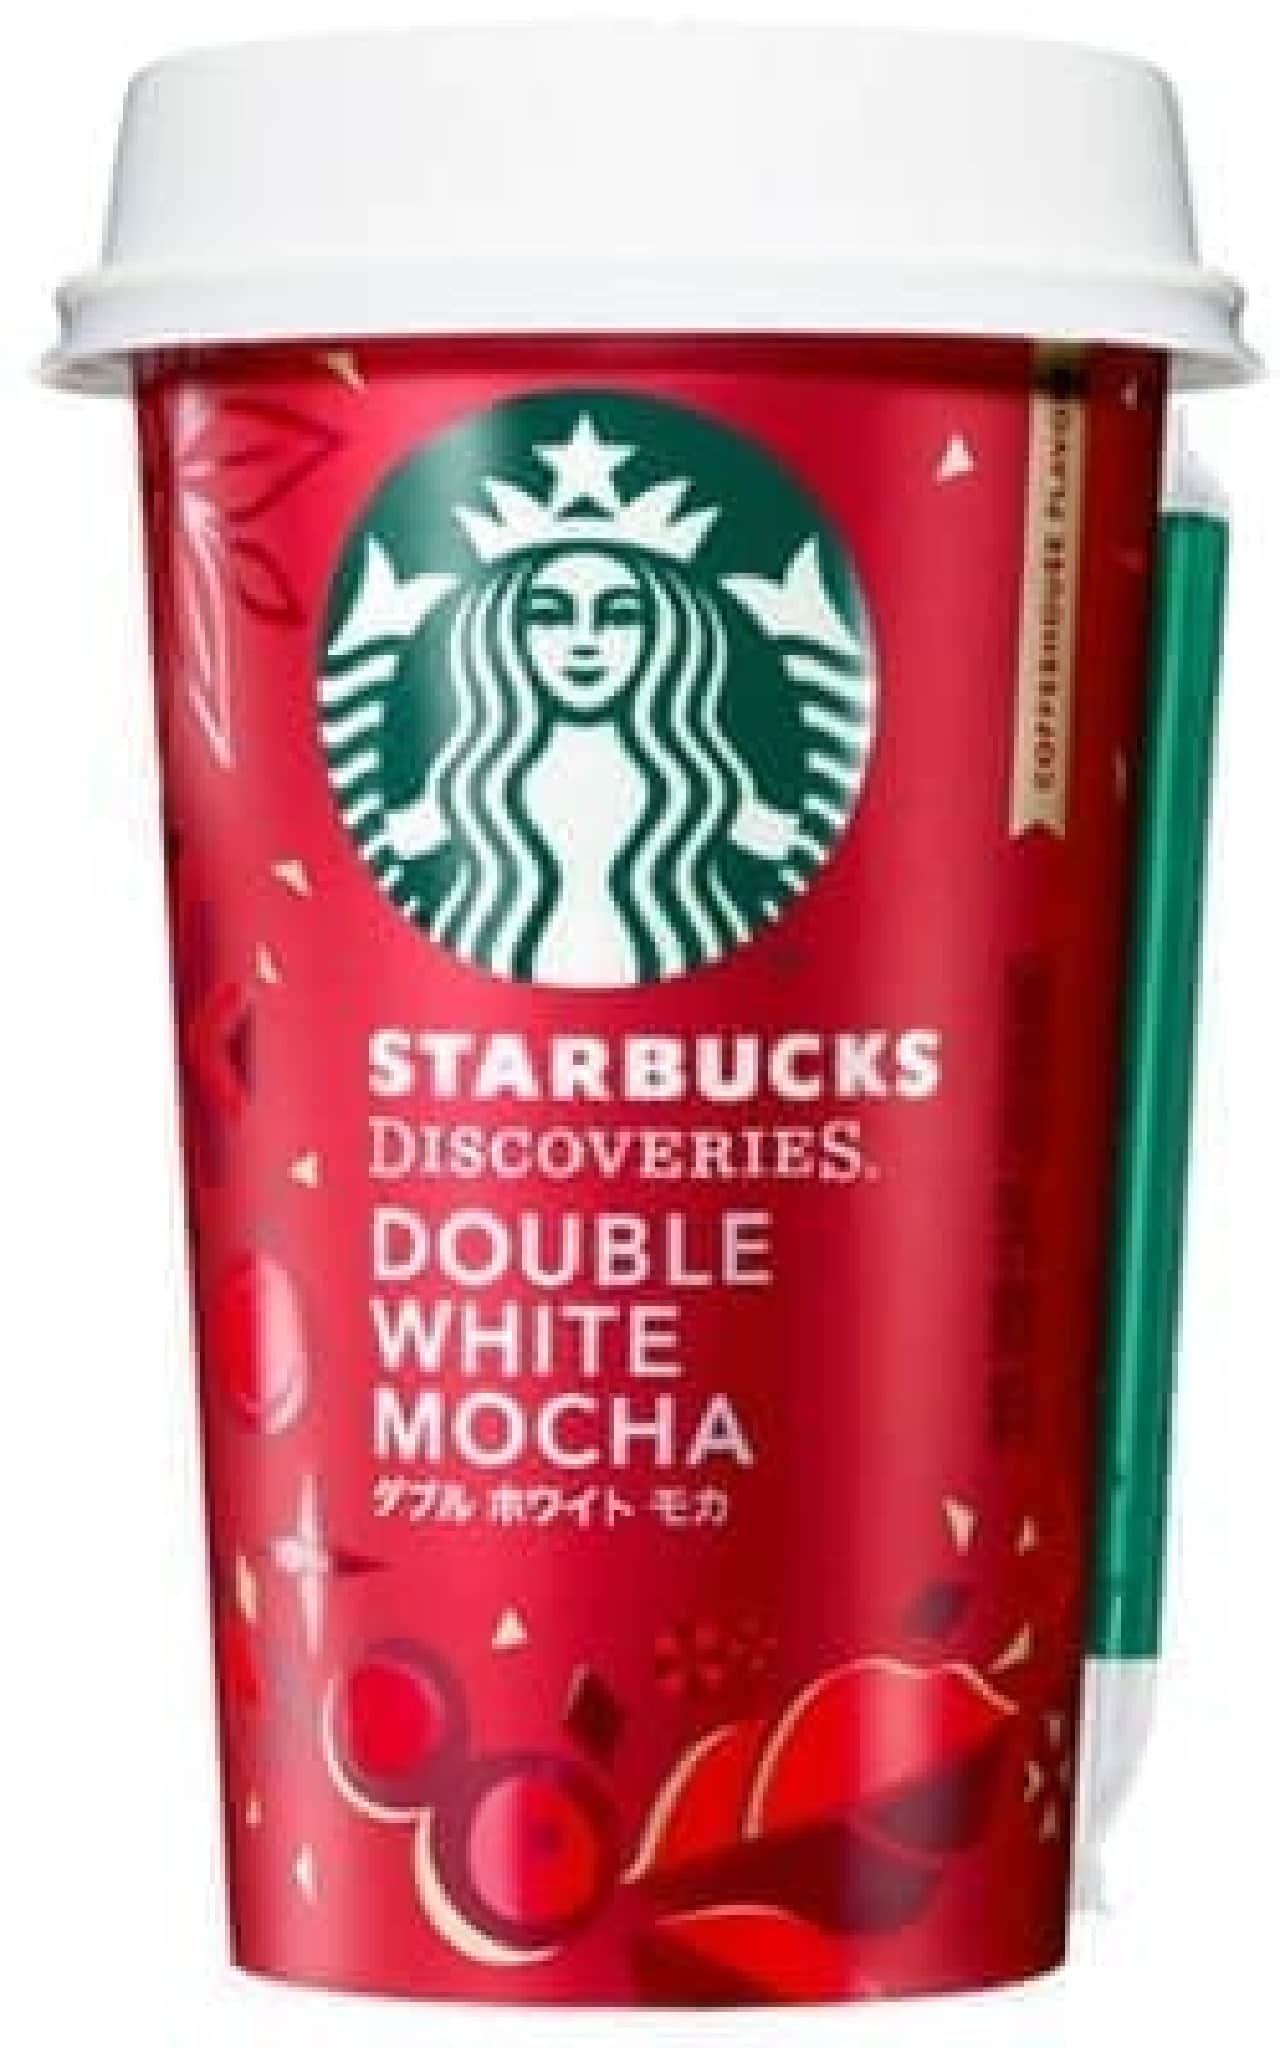 You can buy rich white mocha at convenience stores!